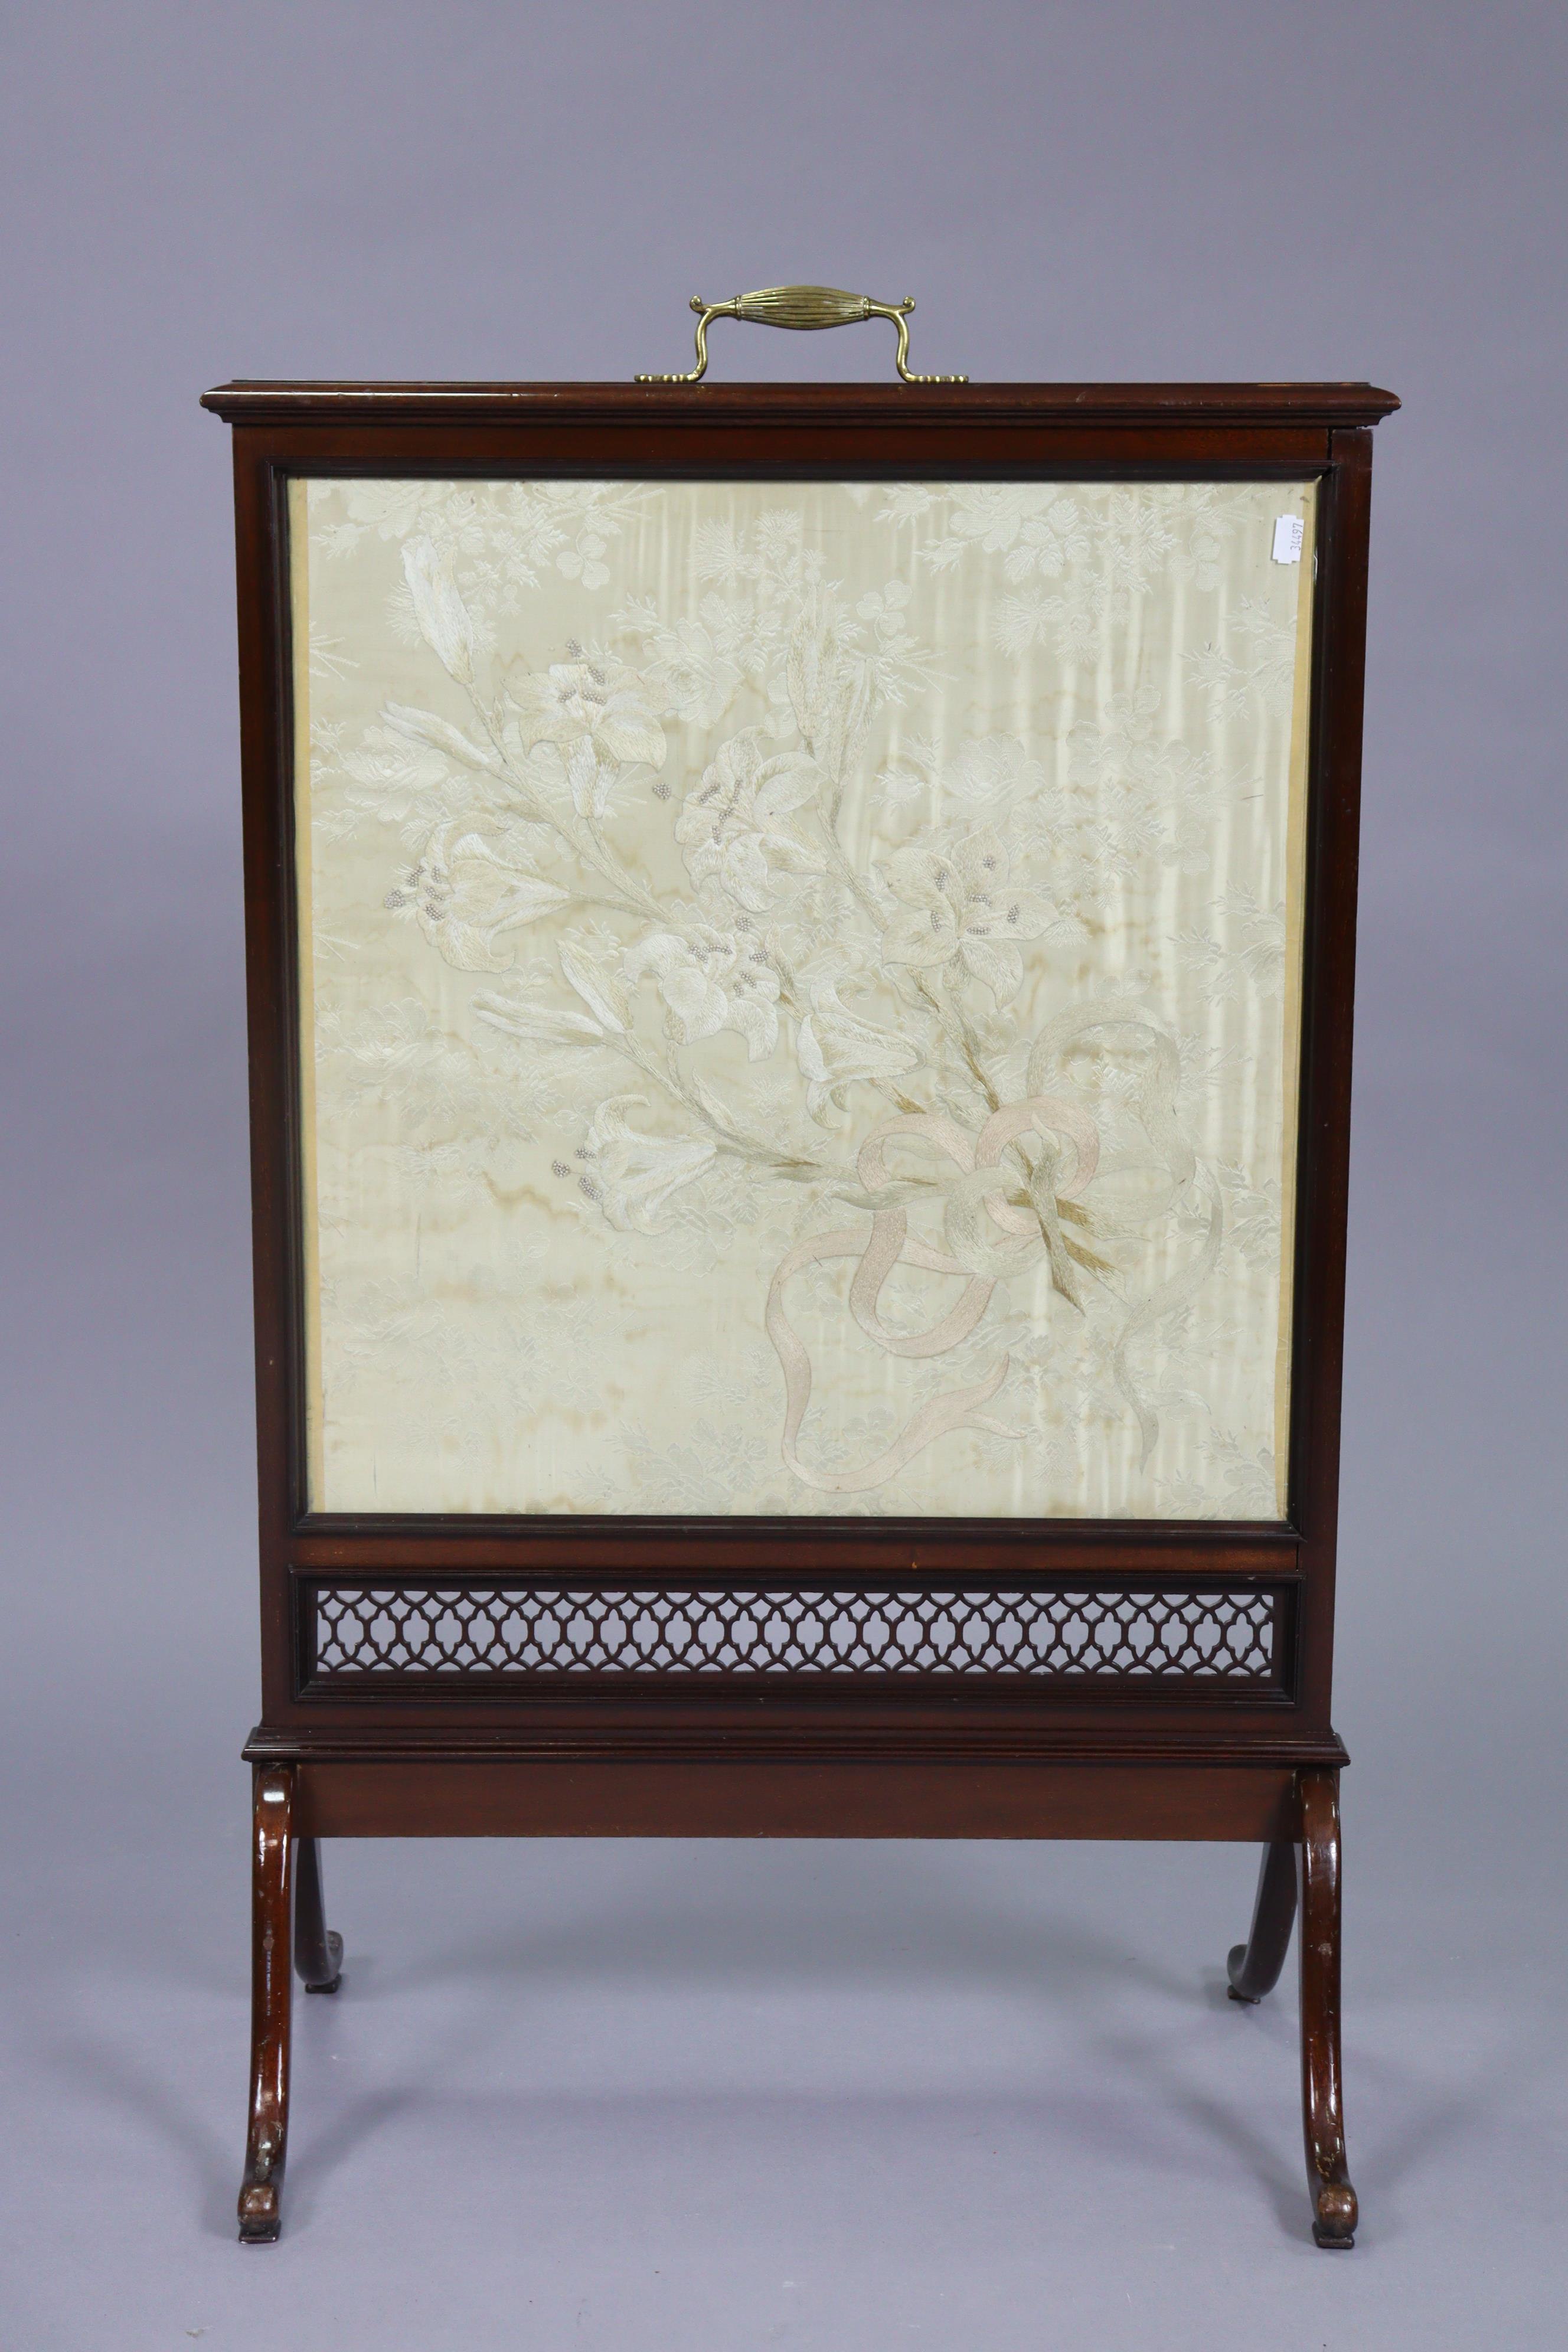 An Edwardian mahogany fire-screen inset with a silk embroidered floral panel, & on a mahogany tripod - Image 2 of 2